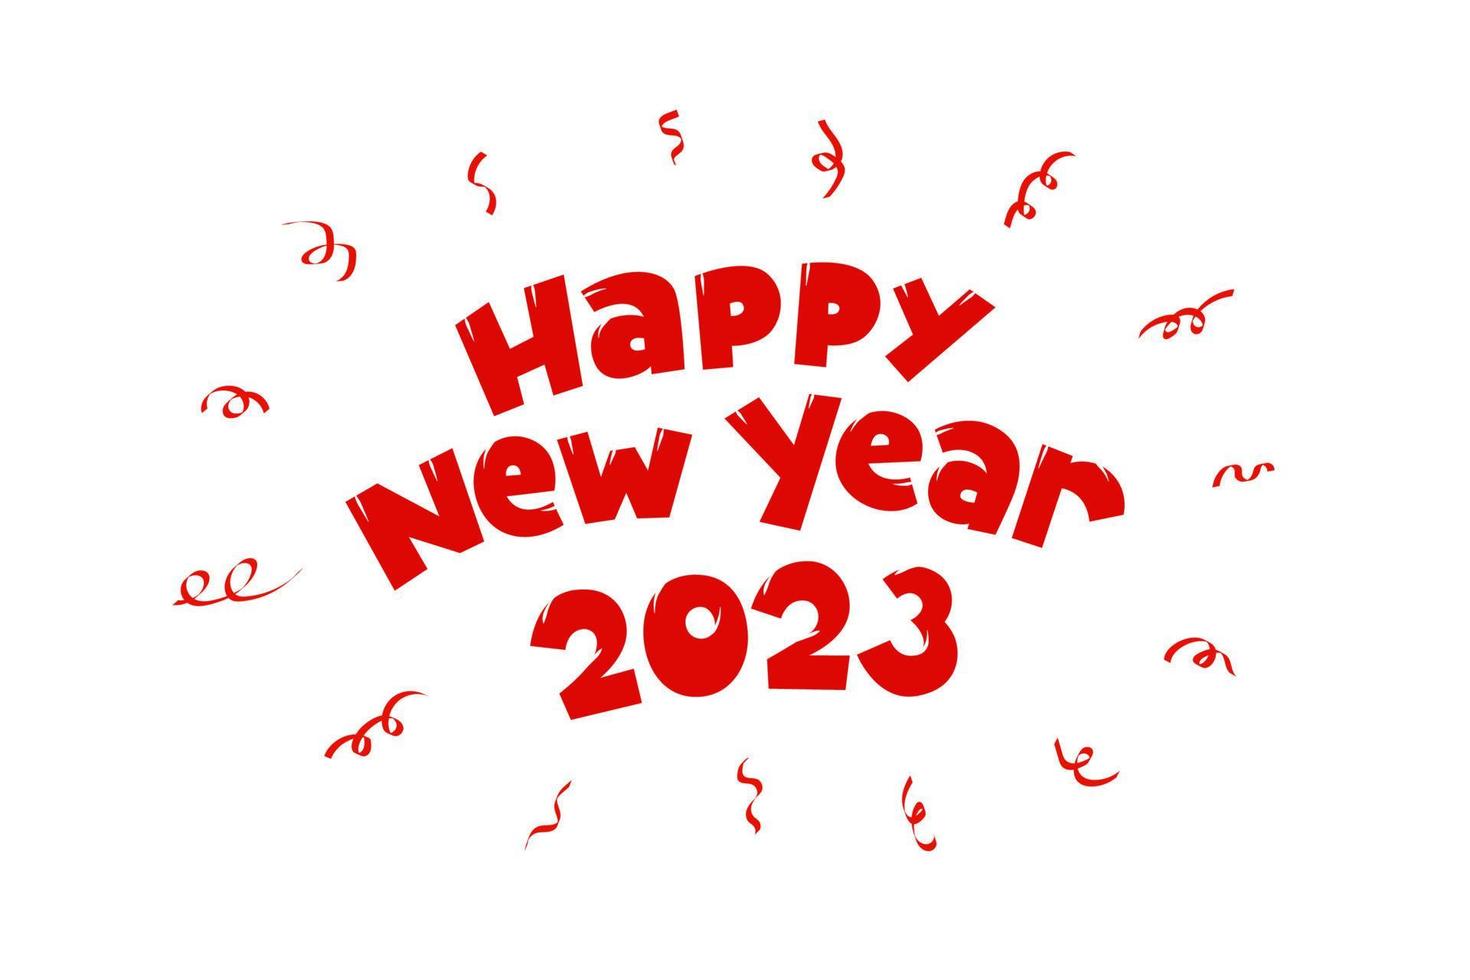 Happy New Year 2023 cartoon style handwritten lettering inscription greeting card design. Merry Christmas holiday festive hand drawn typography text with confetti vector eps illustration